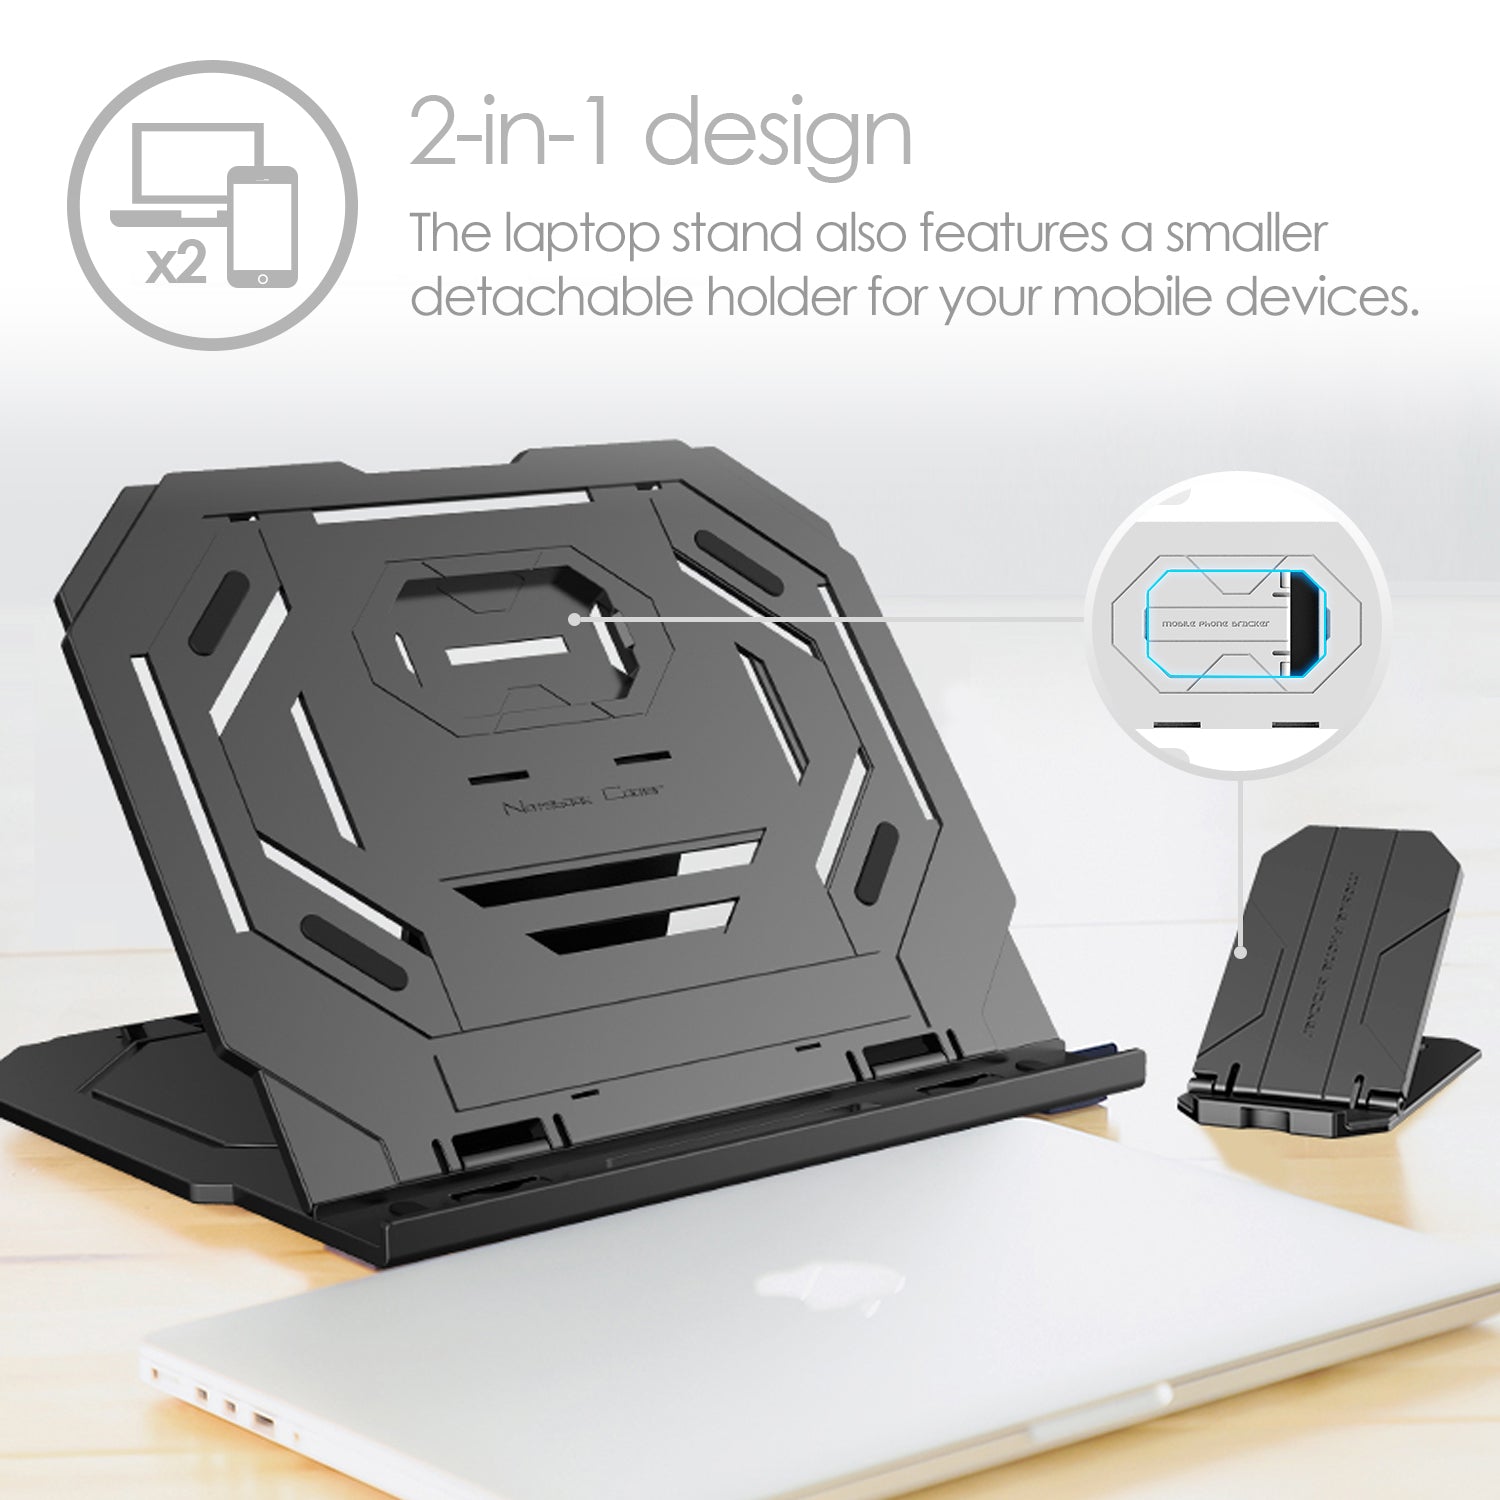 black laptop stand with removable phone stand. both stands  shown in the open standing position.  text reads "2-in-1 design - the laptop stand also features a small detachable holder for your mobile devices"